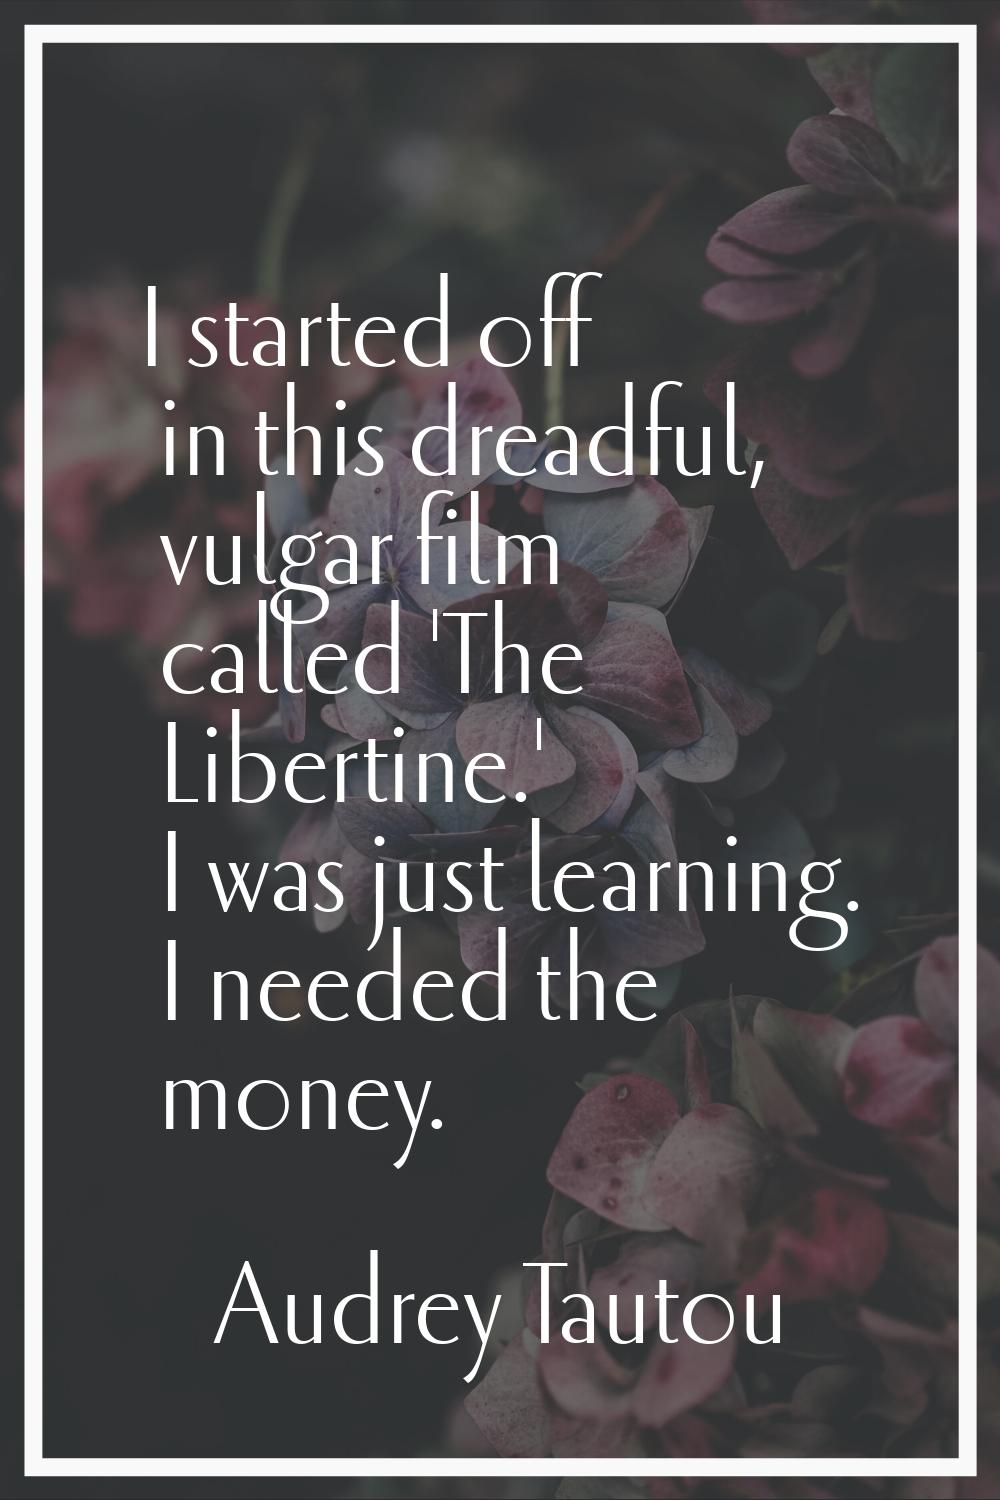 I started off in this dreadful, vulgar film called 'The Libertine.' I was just learning. I needed t